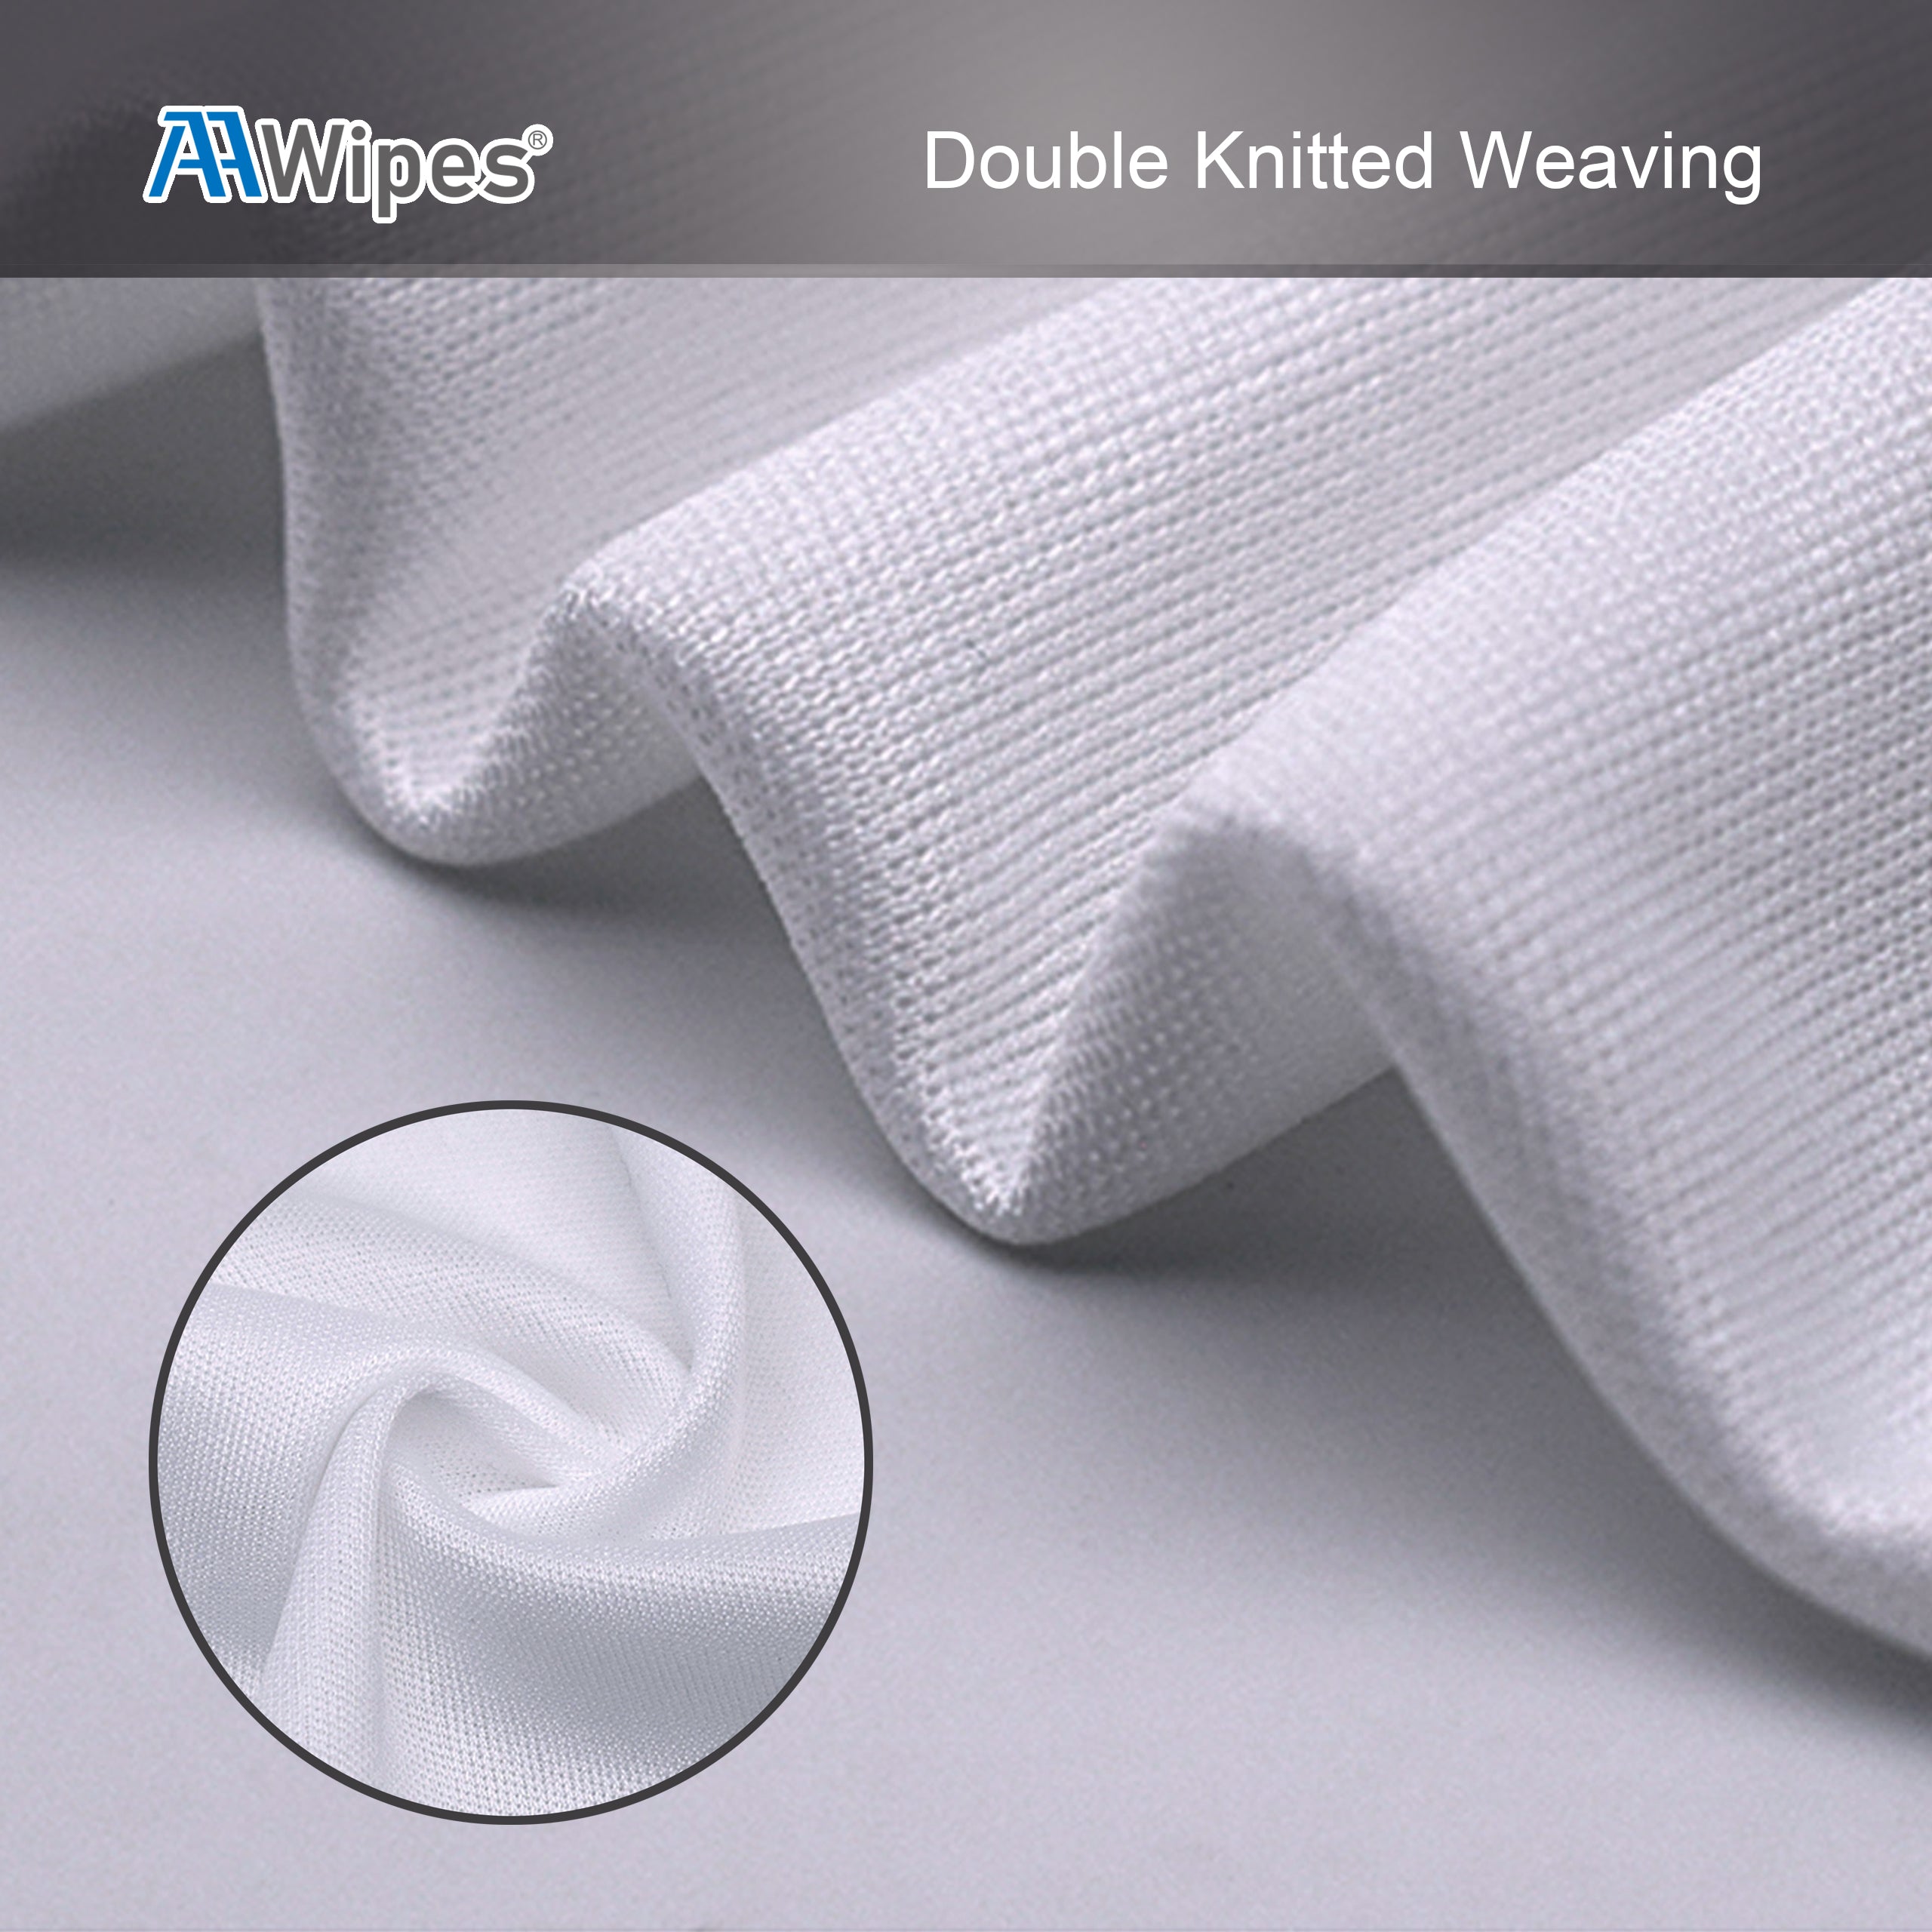 Cleanroom Double Knit 100% Polyester Wipers 6"x6" (Starting at 1 Box with 6,000 Wipes per 40 Bags) (No. CP14006)